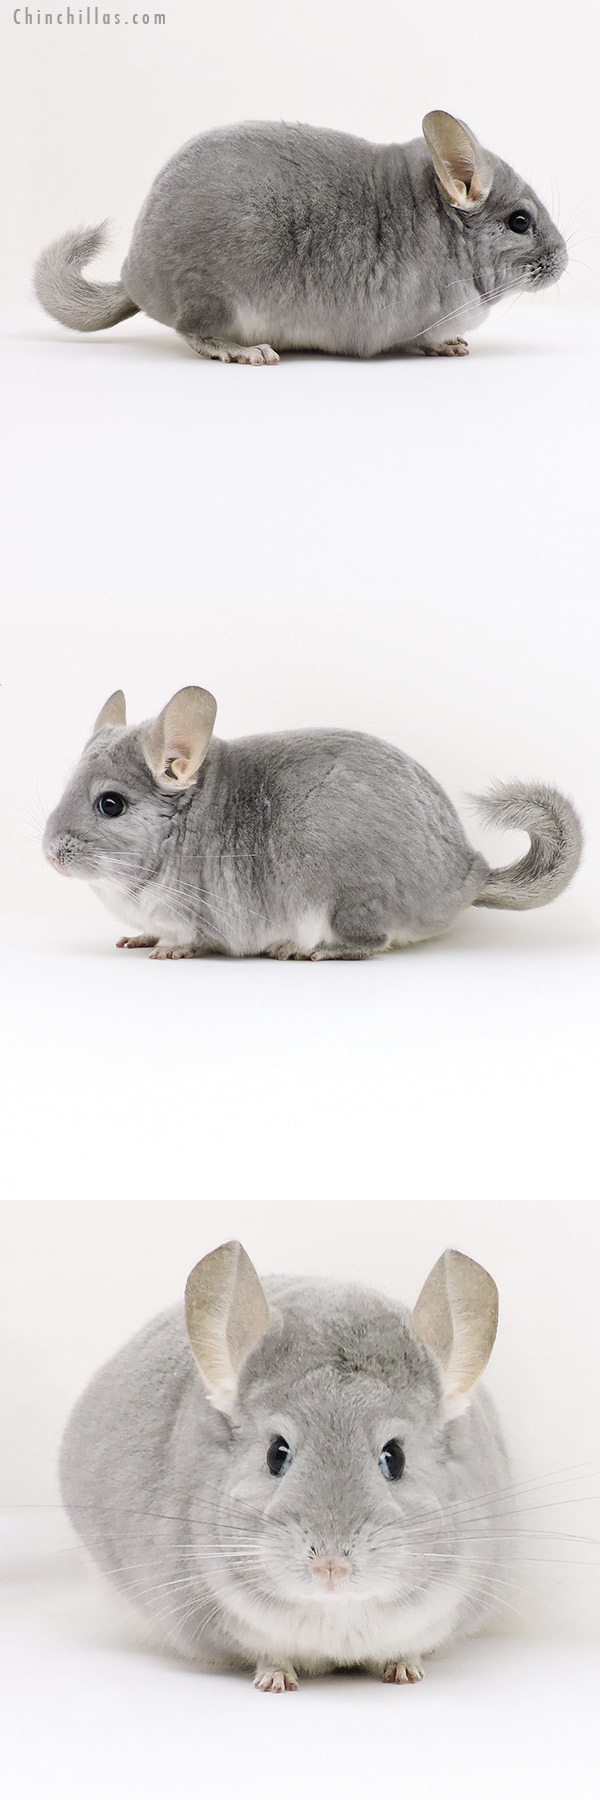 Chinchilla or related item offered for sale or export on Chinchillas.com - 18142 Large Premium Production Quality Blue Diamond Female Chinchilla